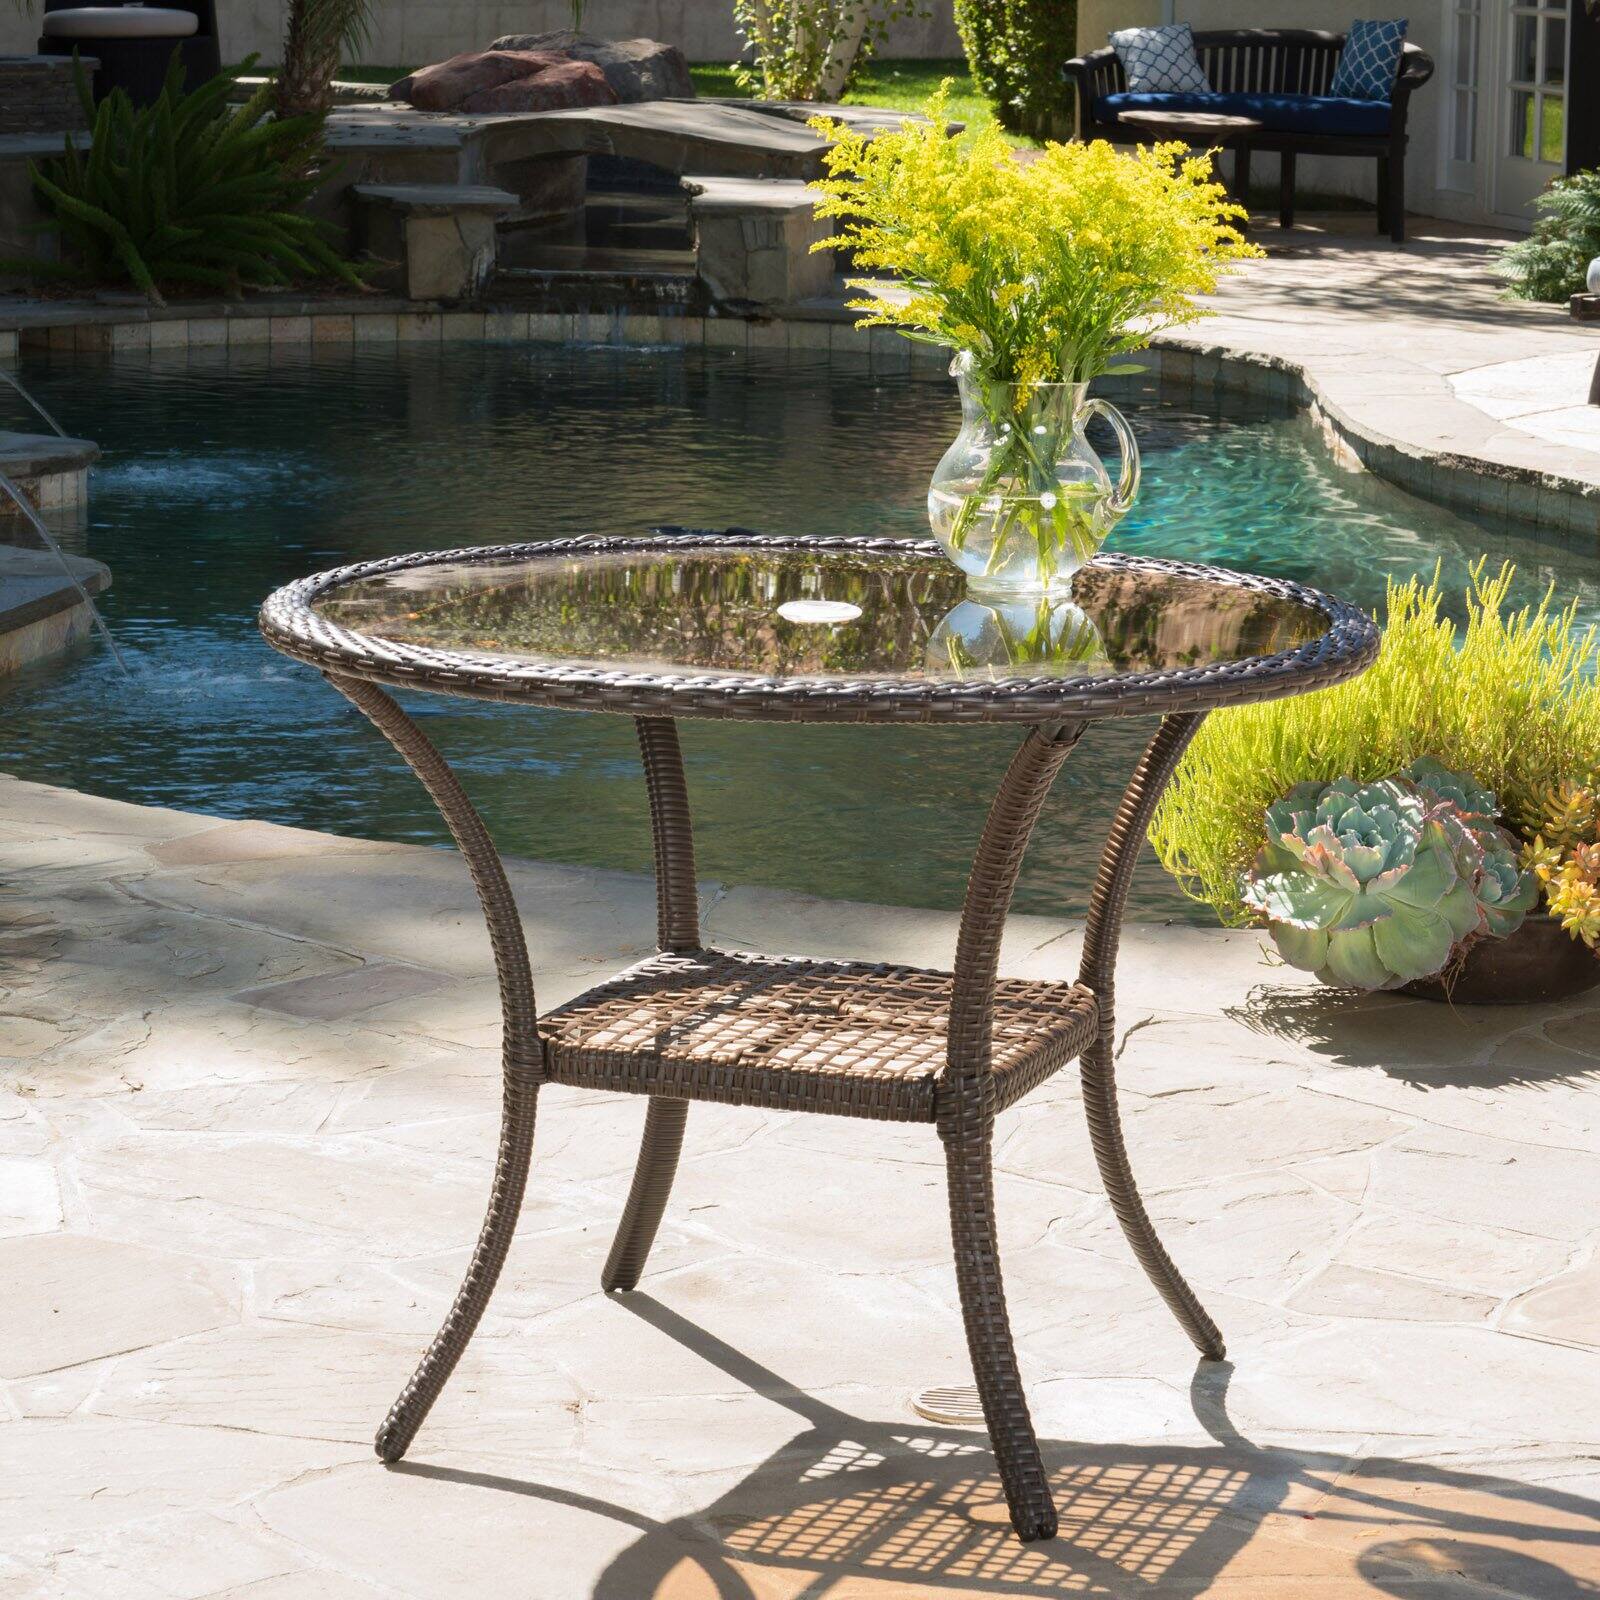 San Pico Outdoor Wicker with Glass Table - image 1 of 5